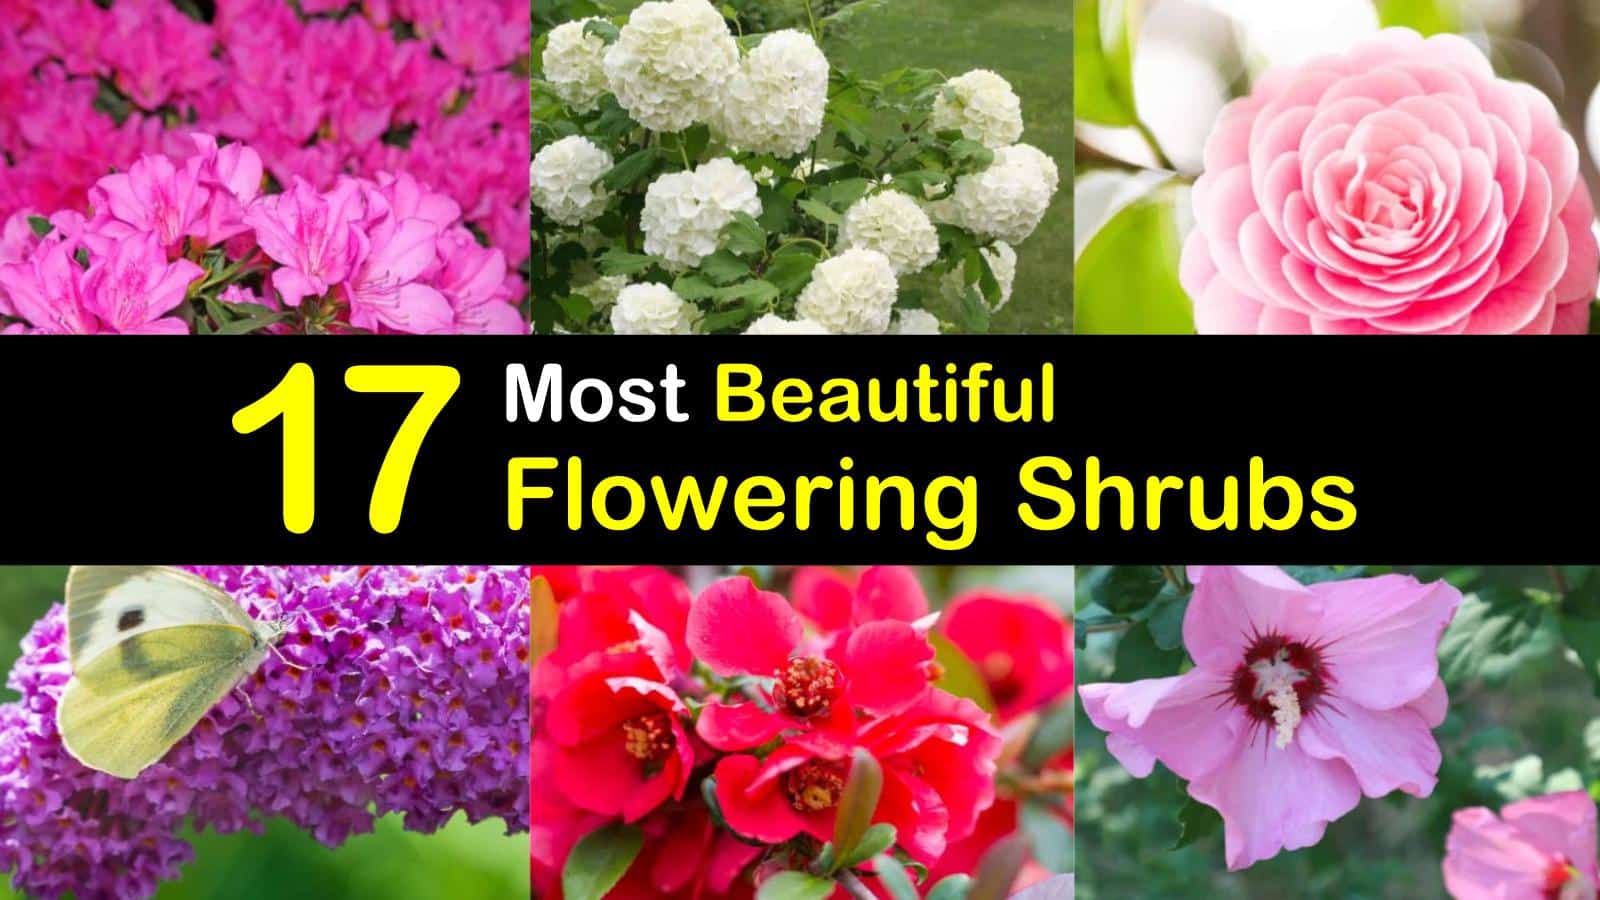 20 Most Beautiful Flowering Shrubs   Amazing Bushes for a Colorful ...